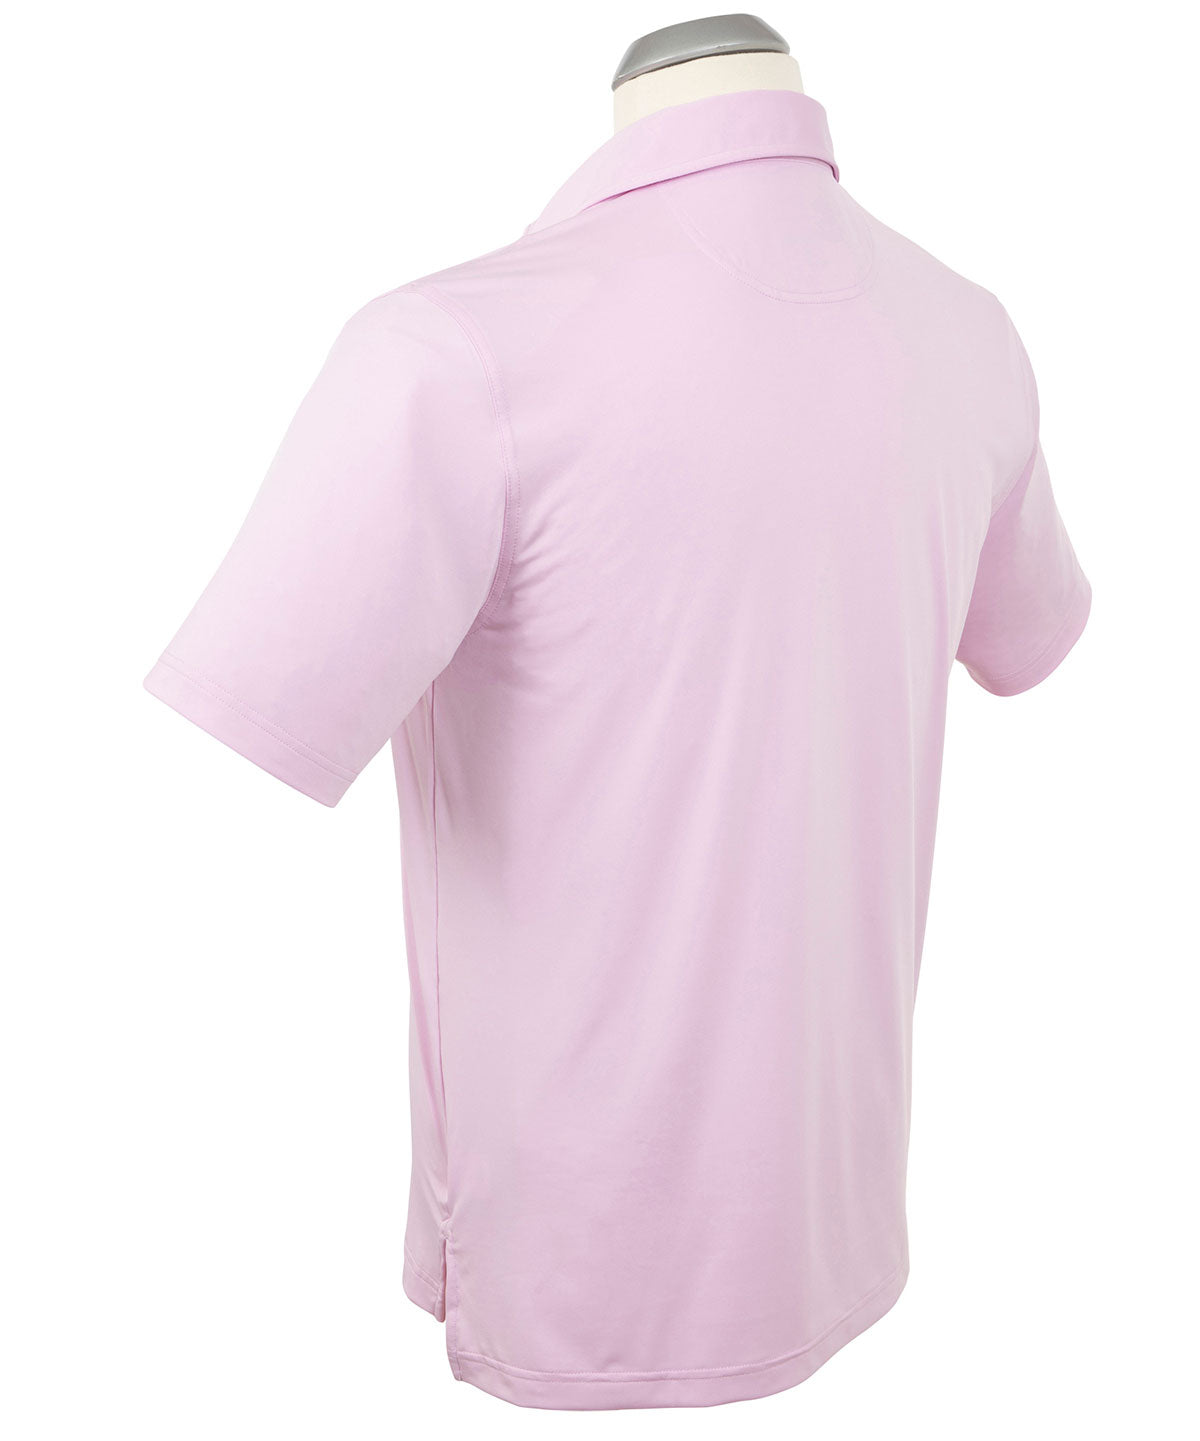 Performance Jersey Solid Polo Shirt